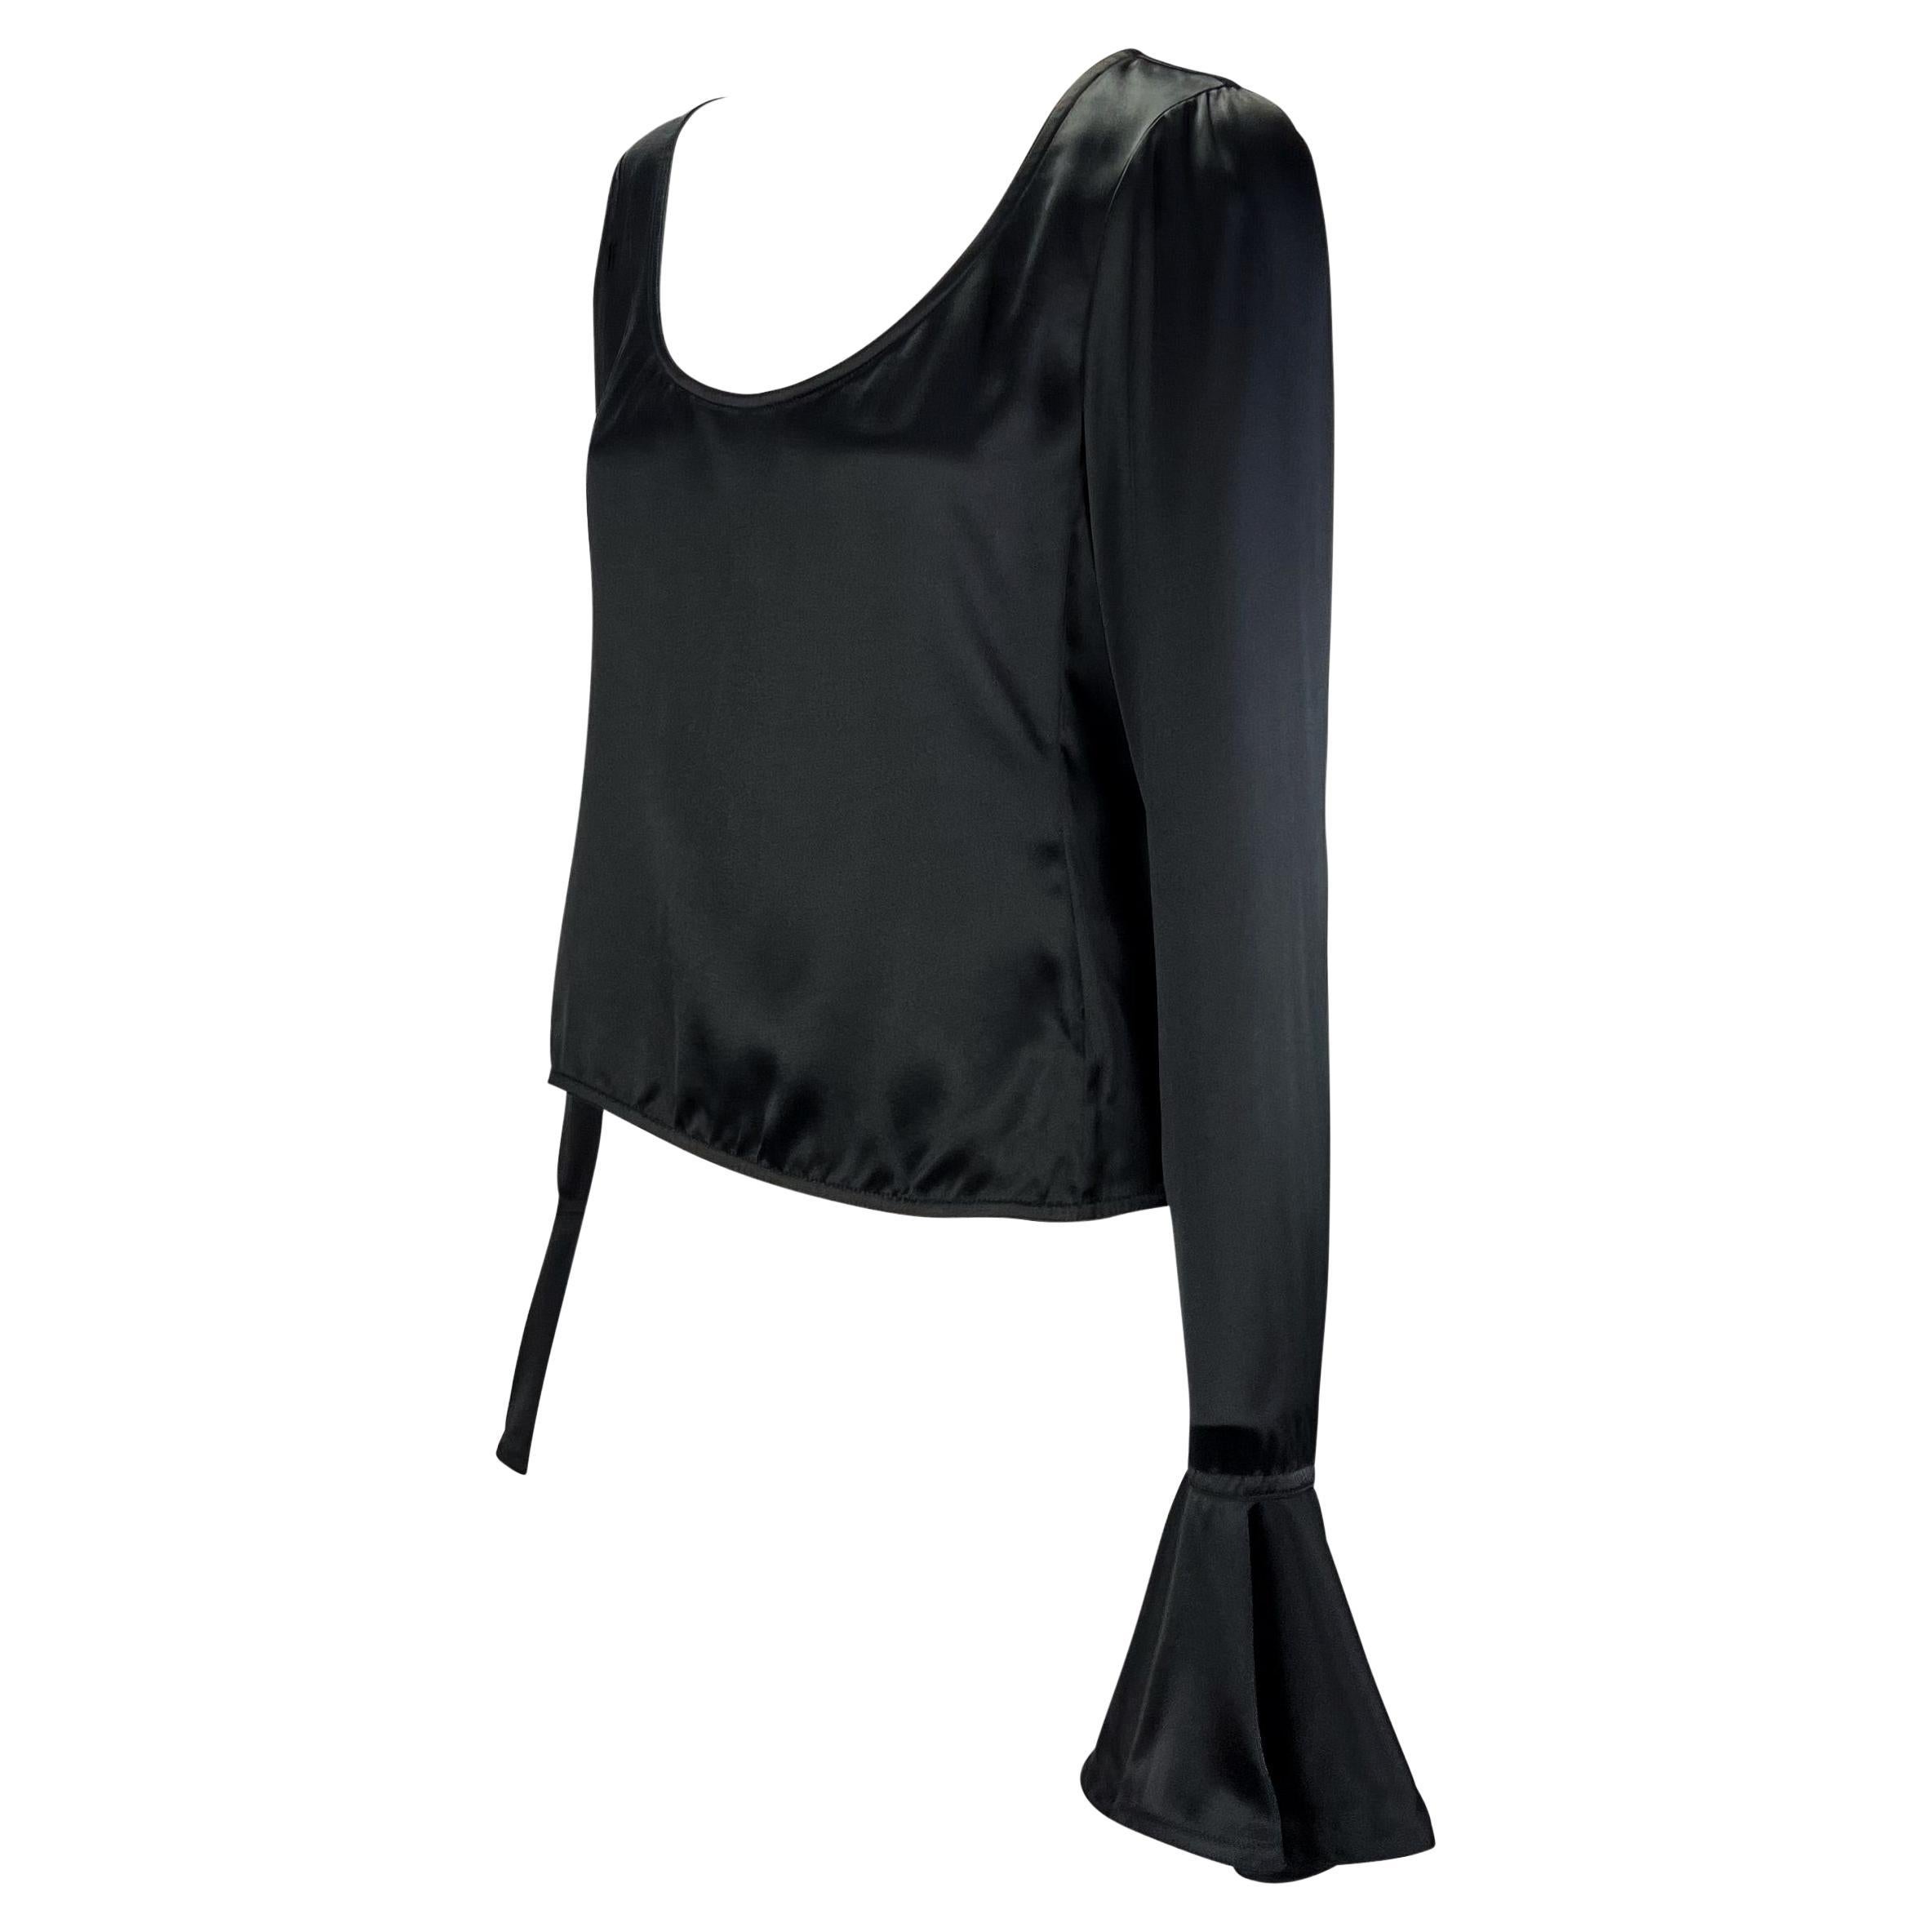 Presenting a luxurious black silk satin blouse designed by Tom Ford for Yves Saint Laurent Rive Gauche's Fall/Winter 2003 collection. A large scoop neckline and fabulously oversized bell cuffs make this Y2K dream a true knock-out. Check out our